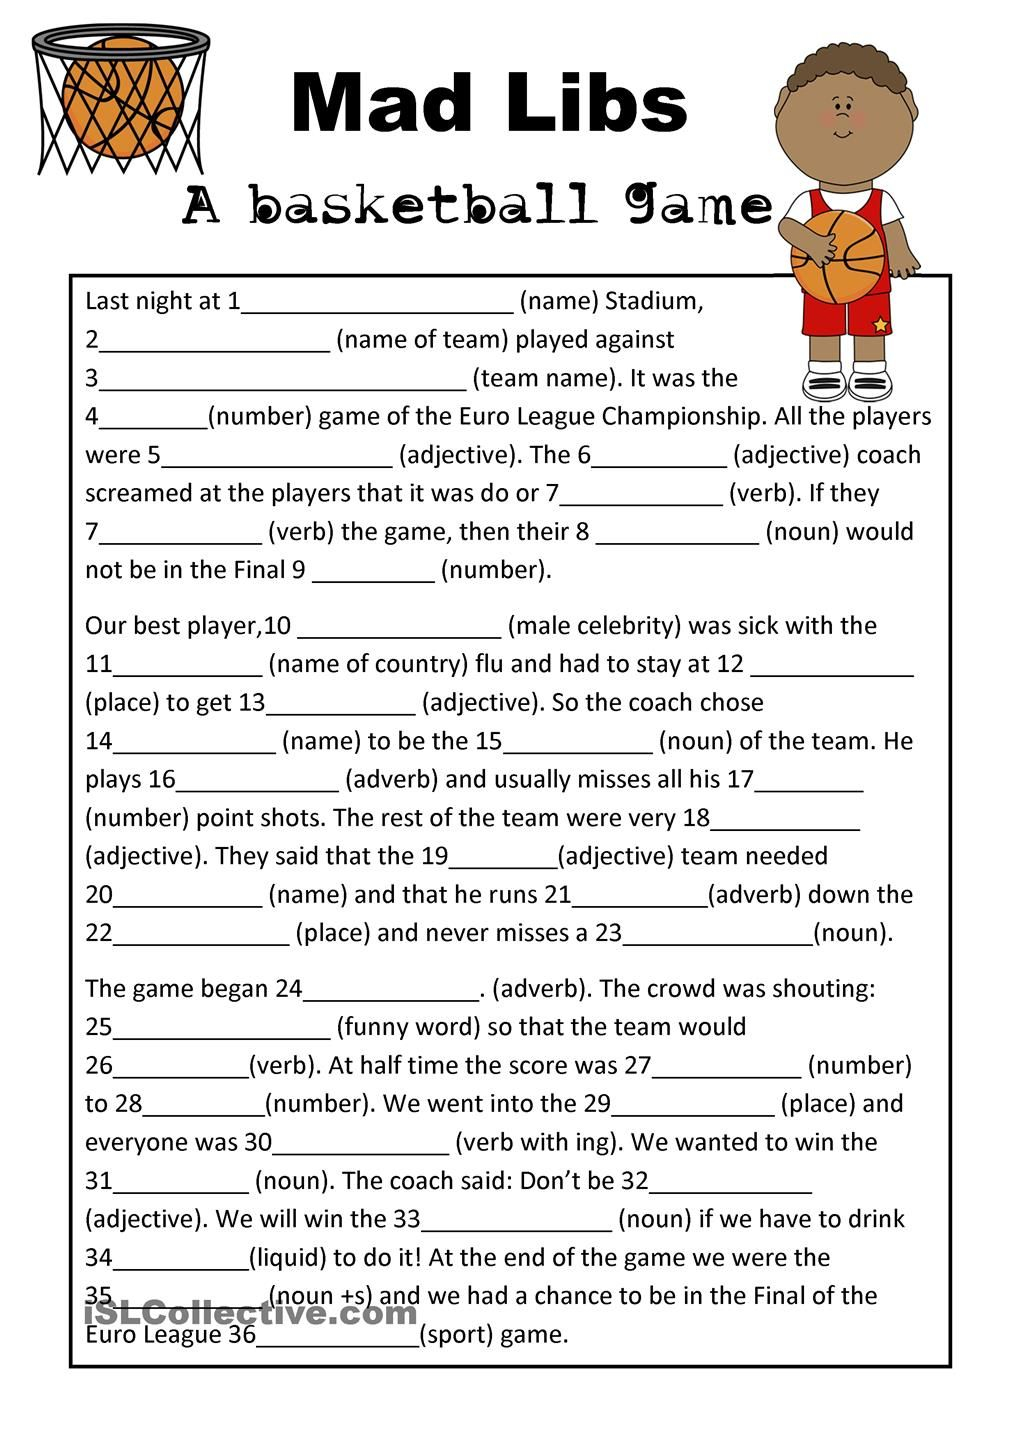 Mad Libs Basketball Game Parts Of Speech Worksheets Kids Mad Libs